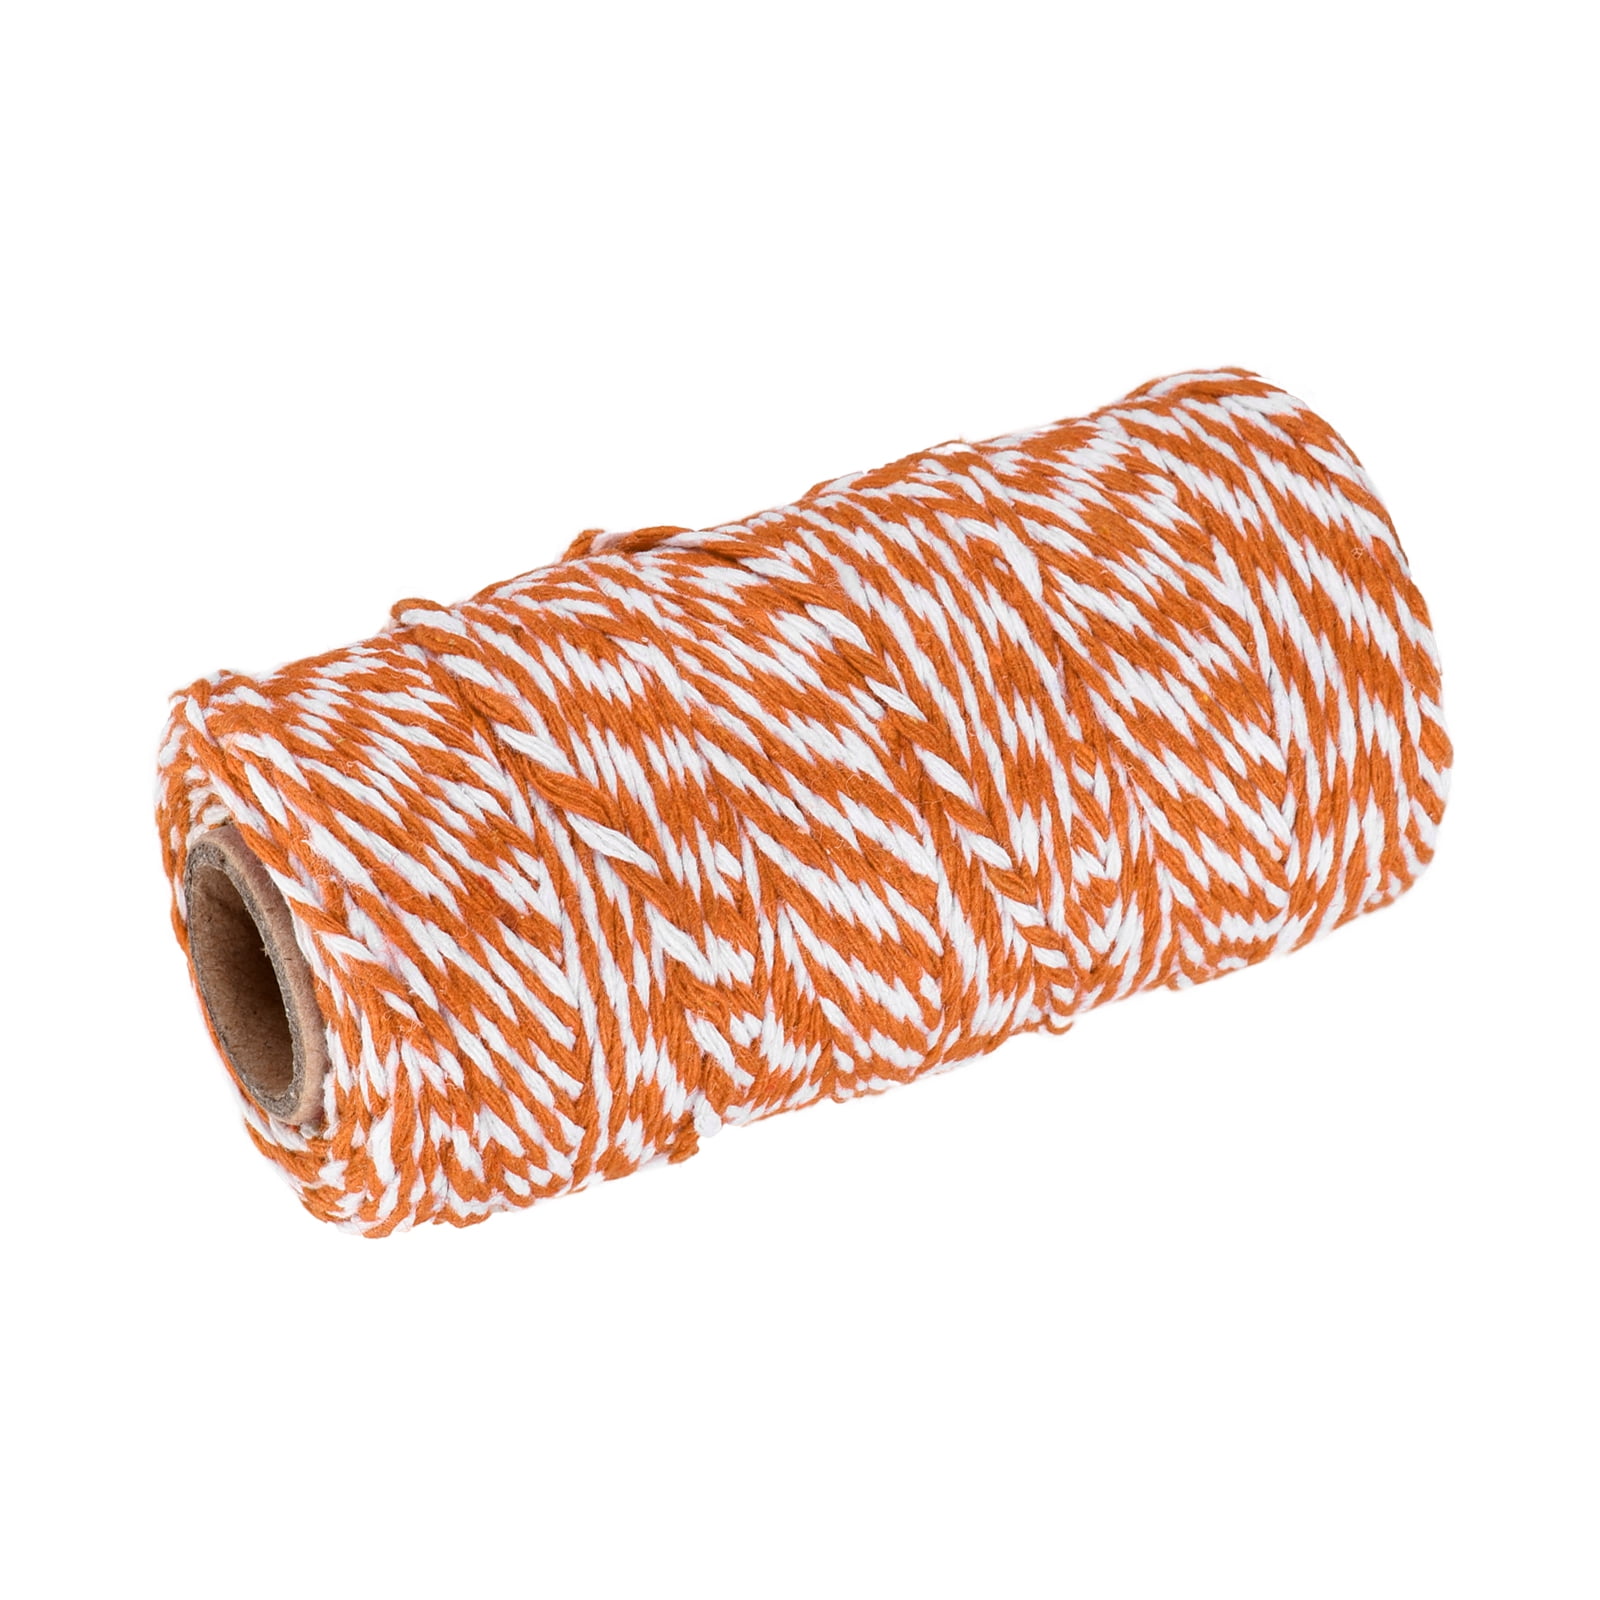 Twine Packing String Wrapping Cotton Twine 100M Orange and White Rope for  Gift Wrapping Twine